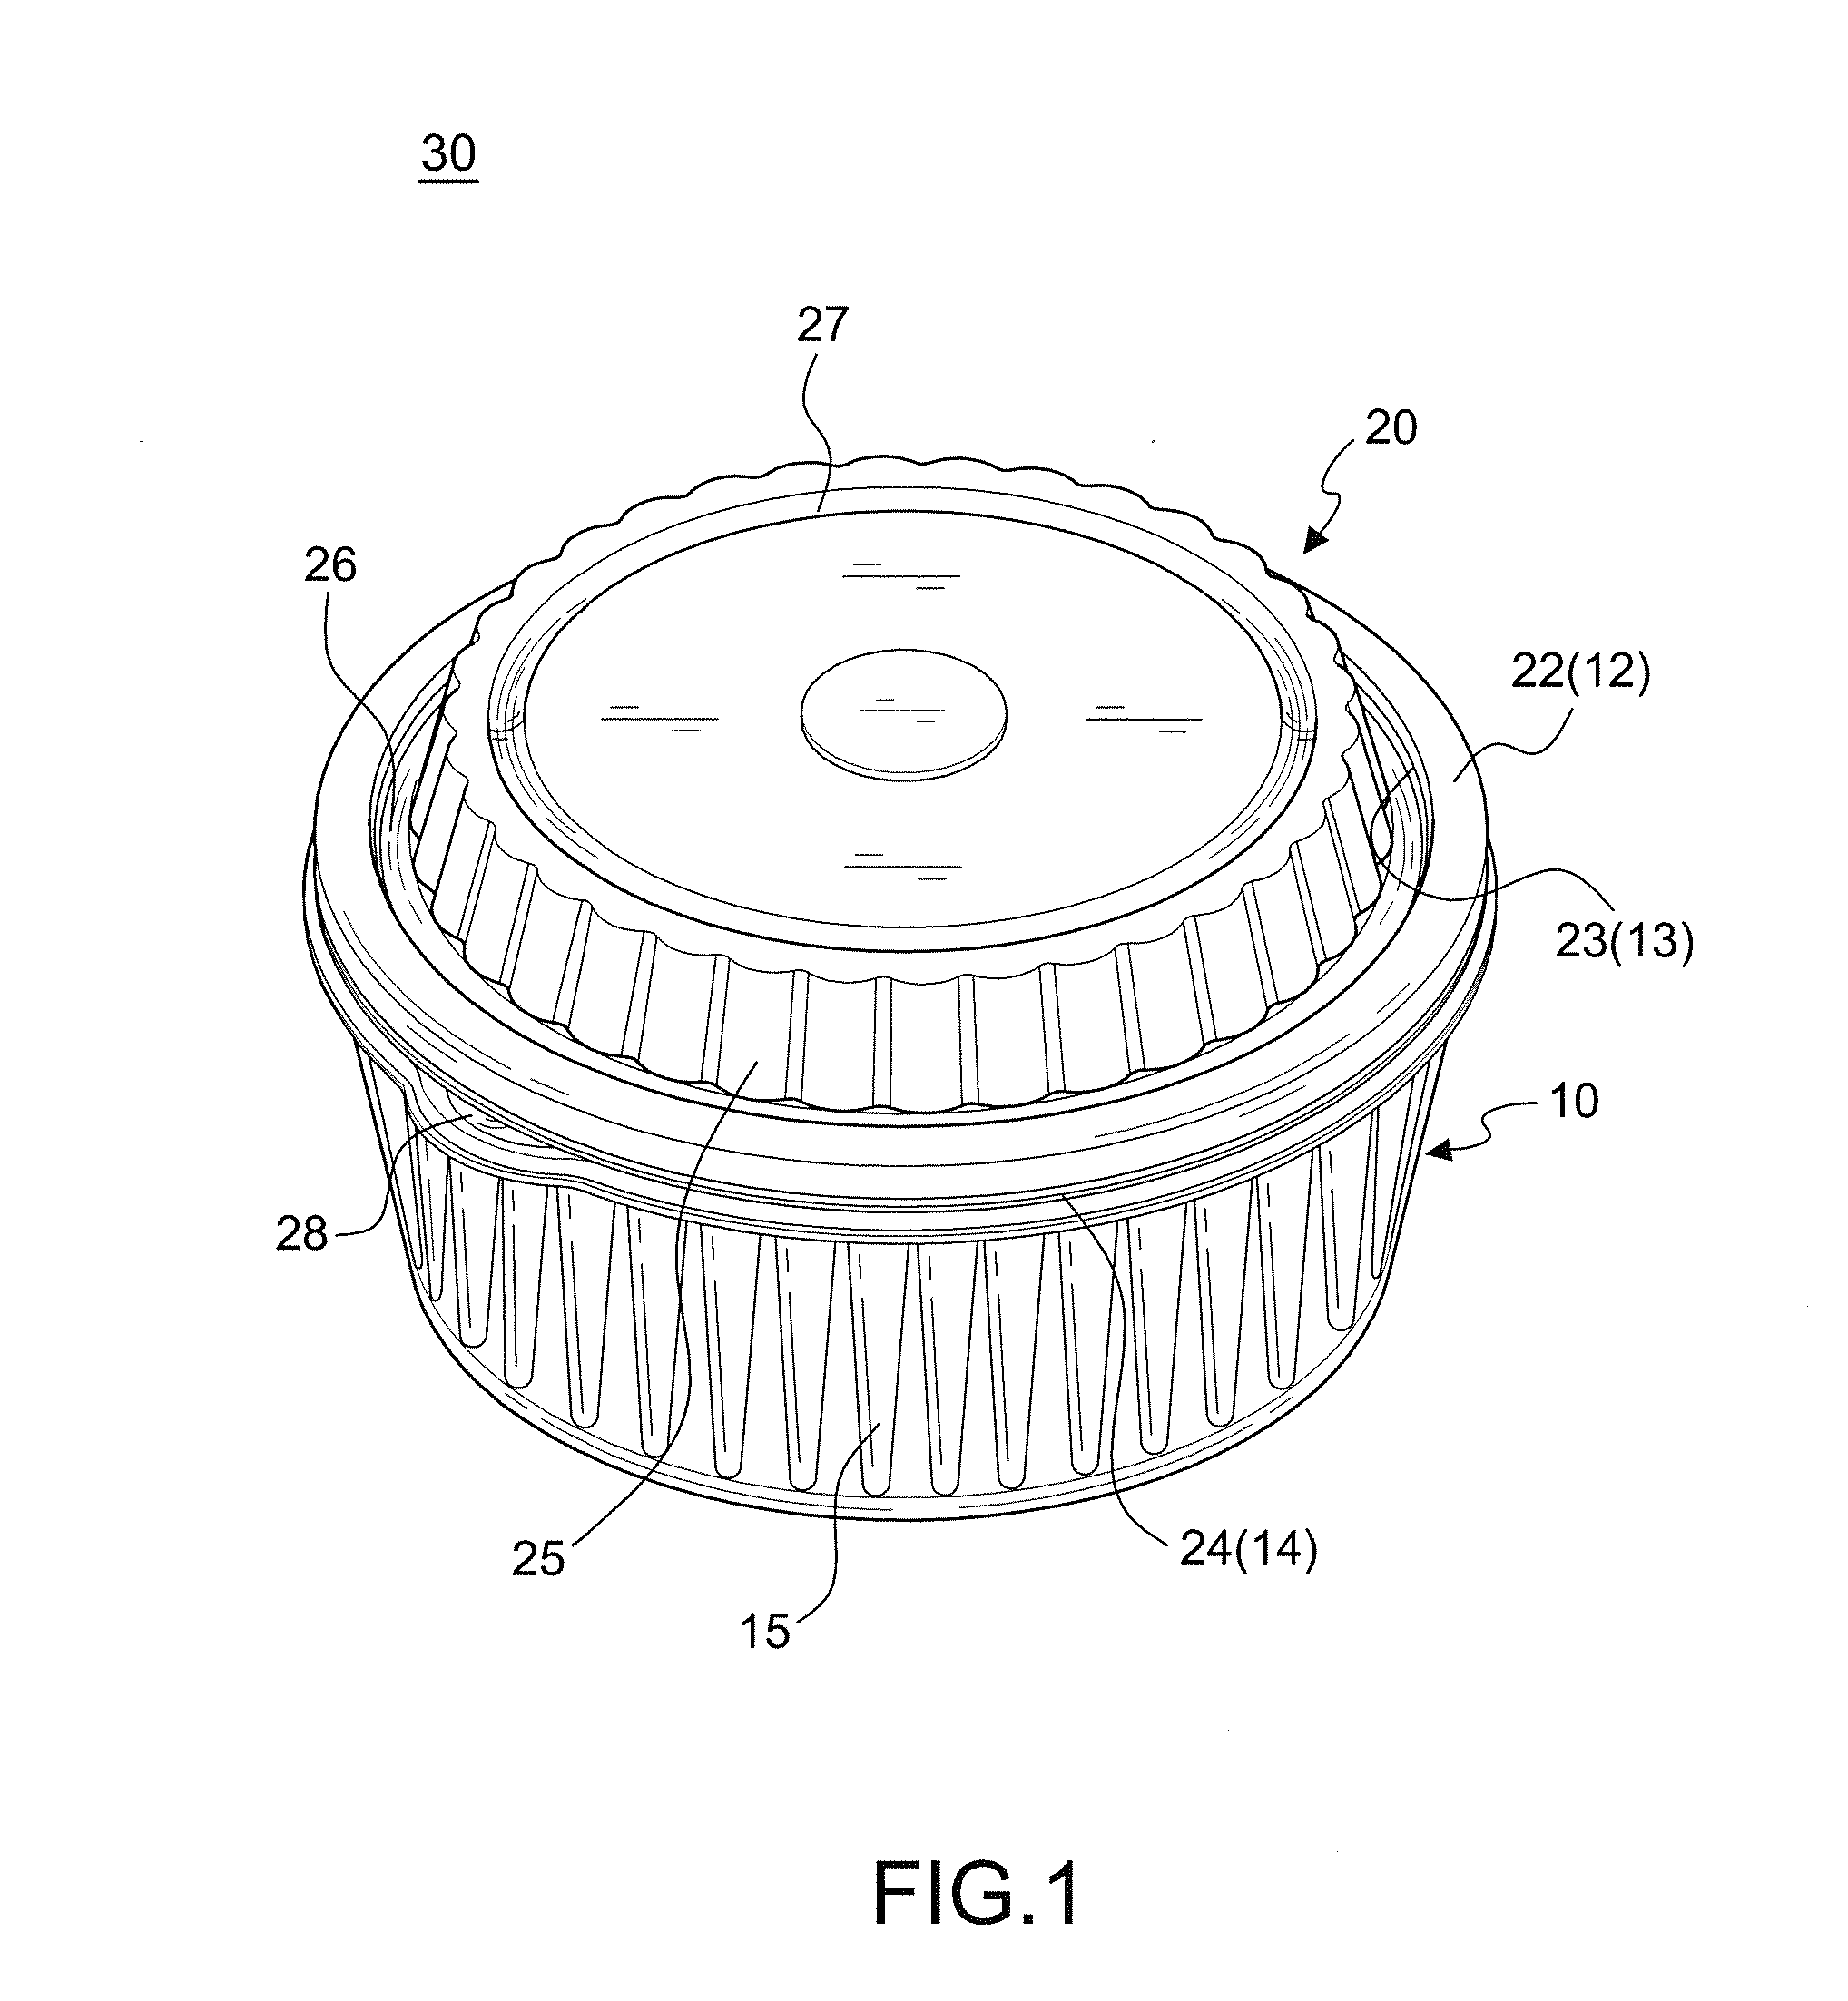 Circular food container with double sealing structure